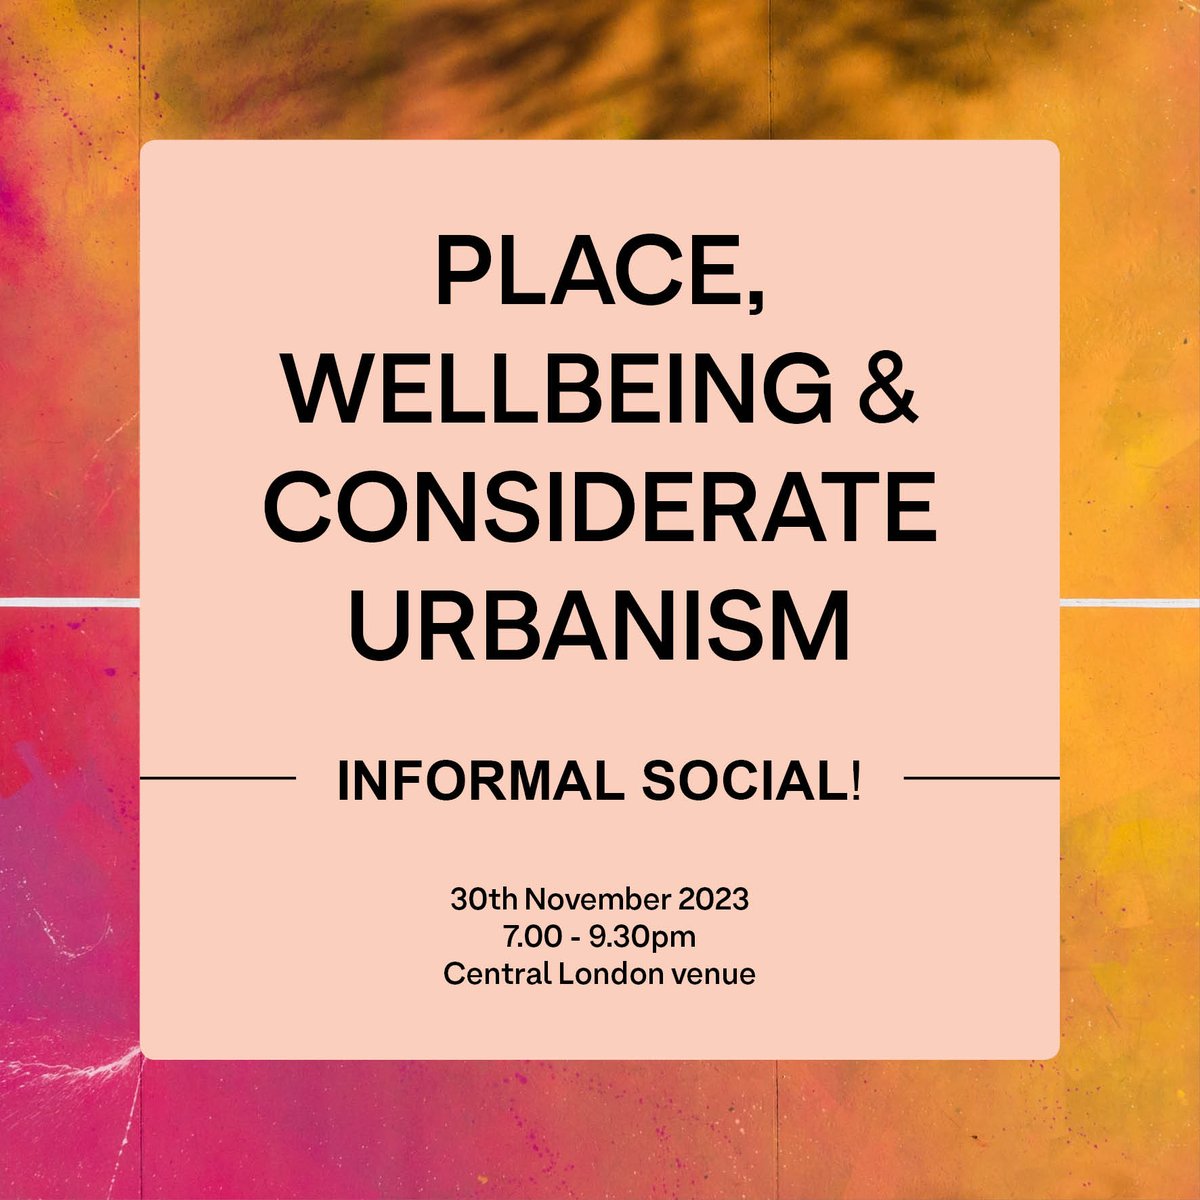 Interested in making places & cities more human, wellbeing-focused & lived-experience led? Join us for an informal gathering of people interested in place, wellbeing & being part of growing the #ConsiderateUrbanism movement. Register 👉 bit.ly/ConsiderateUrb @ConsiderateUrb